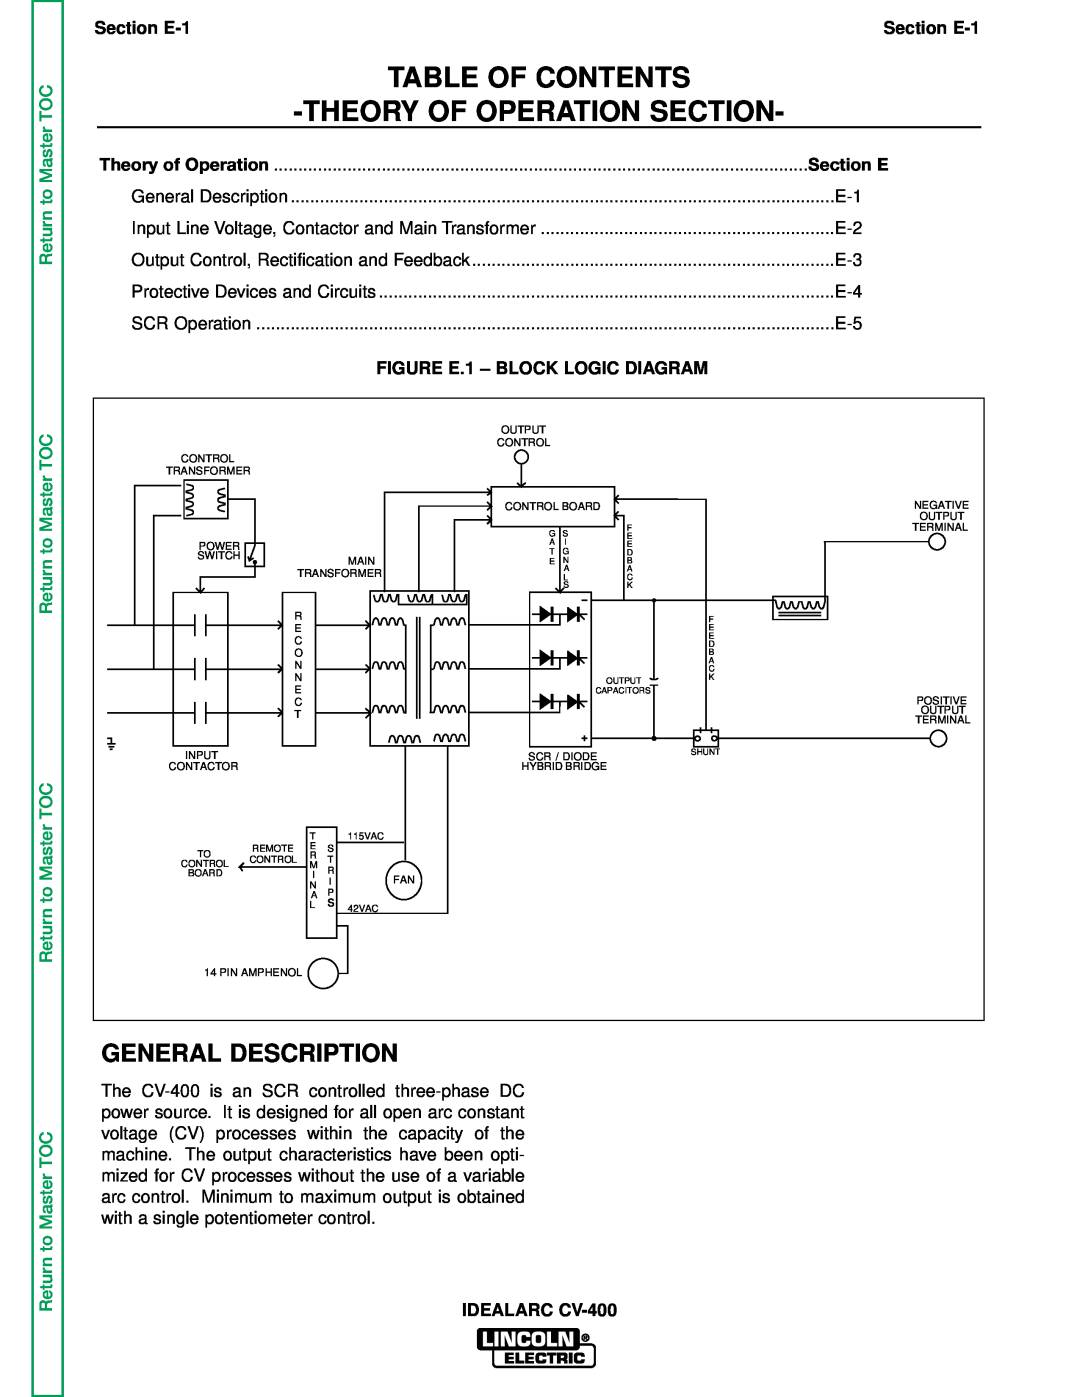 Lincoln Electric SVM136-A Theory Of Operation Section, Table Of Contents, General Description, to Master, Section E 